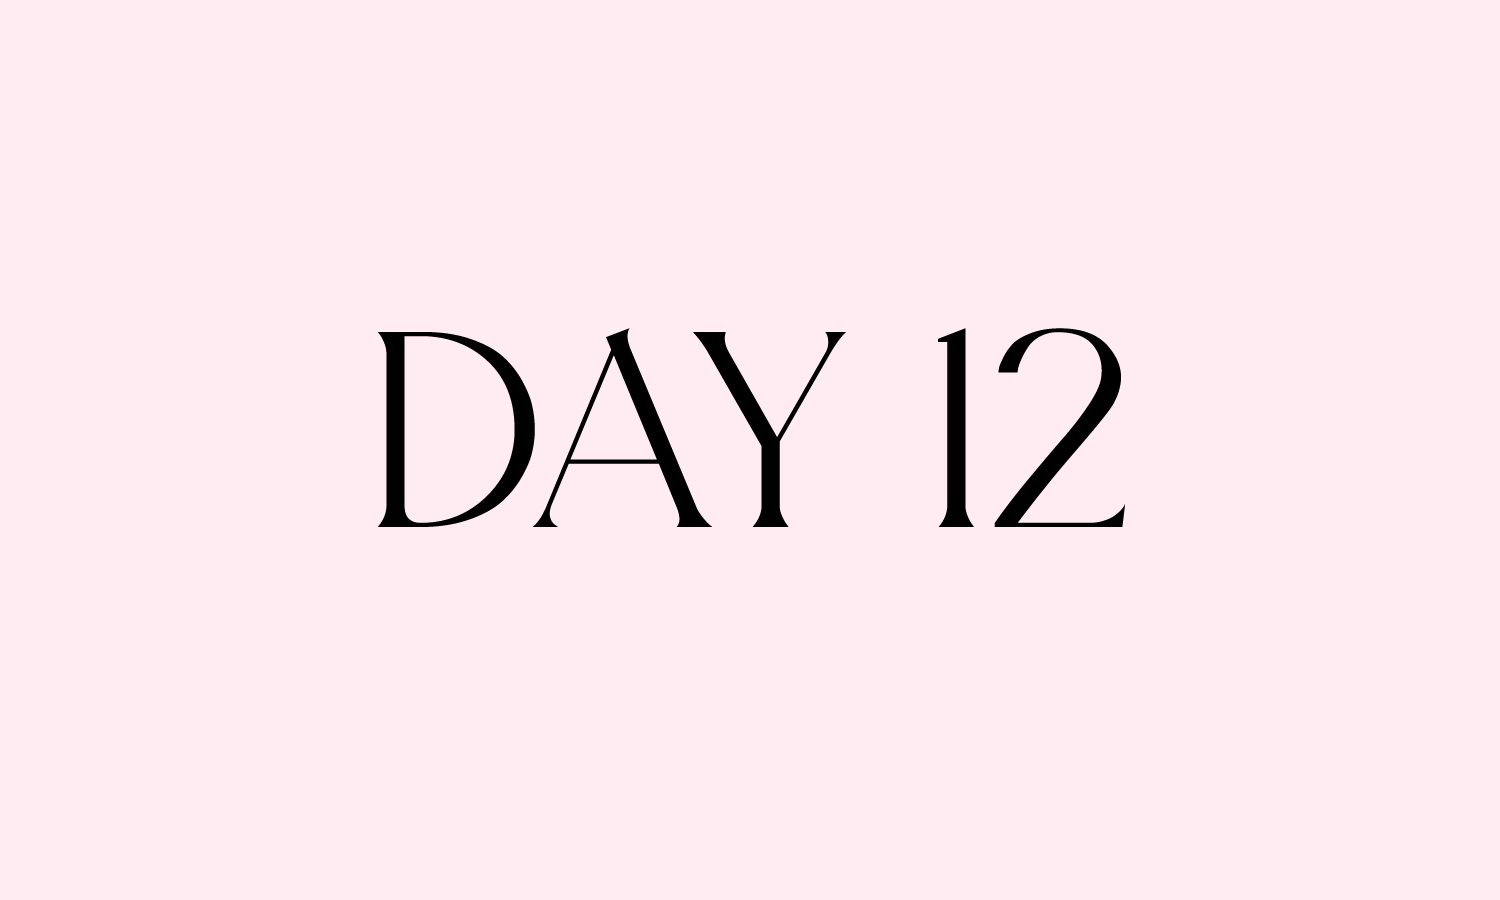 Day 12